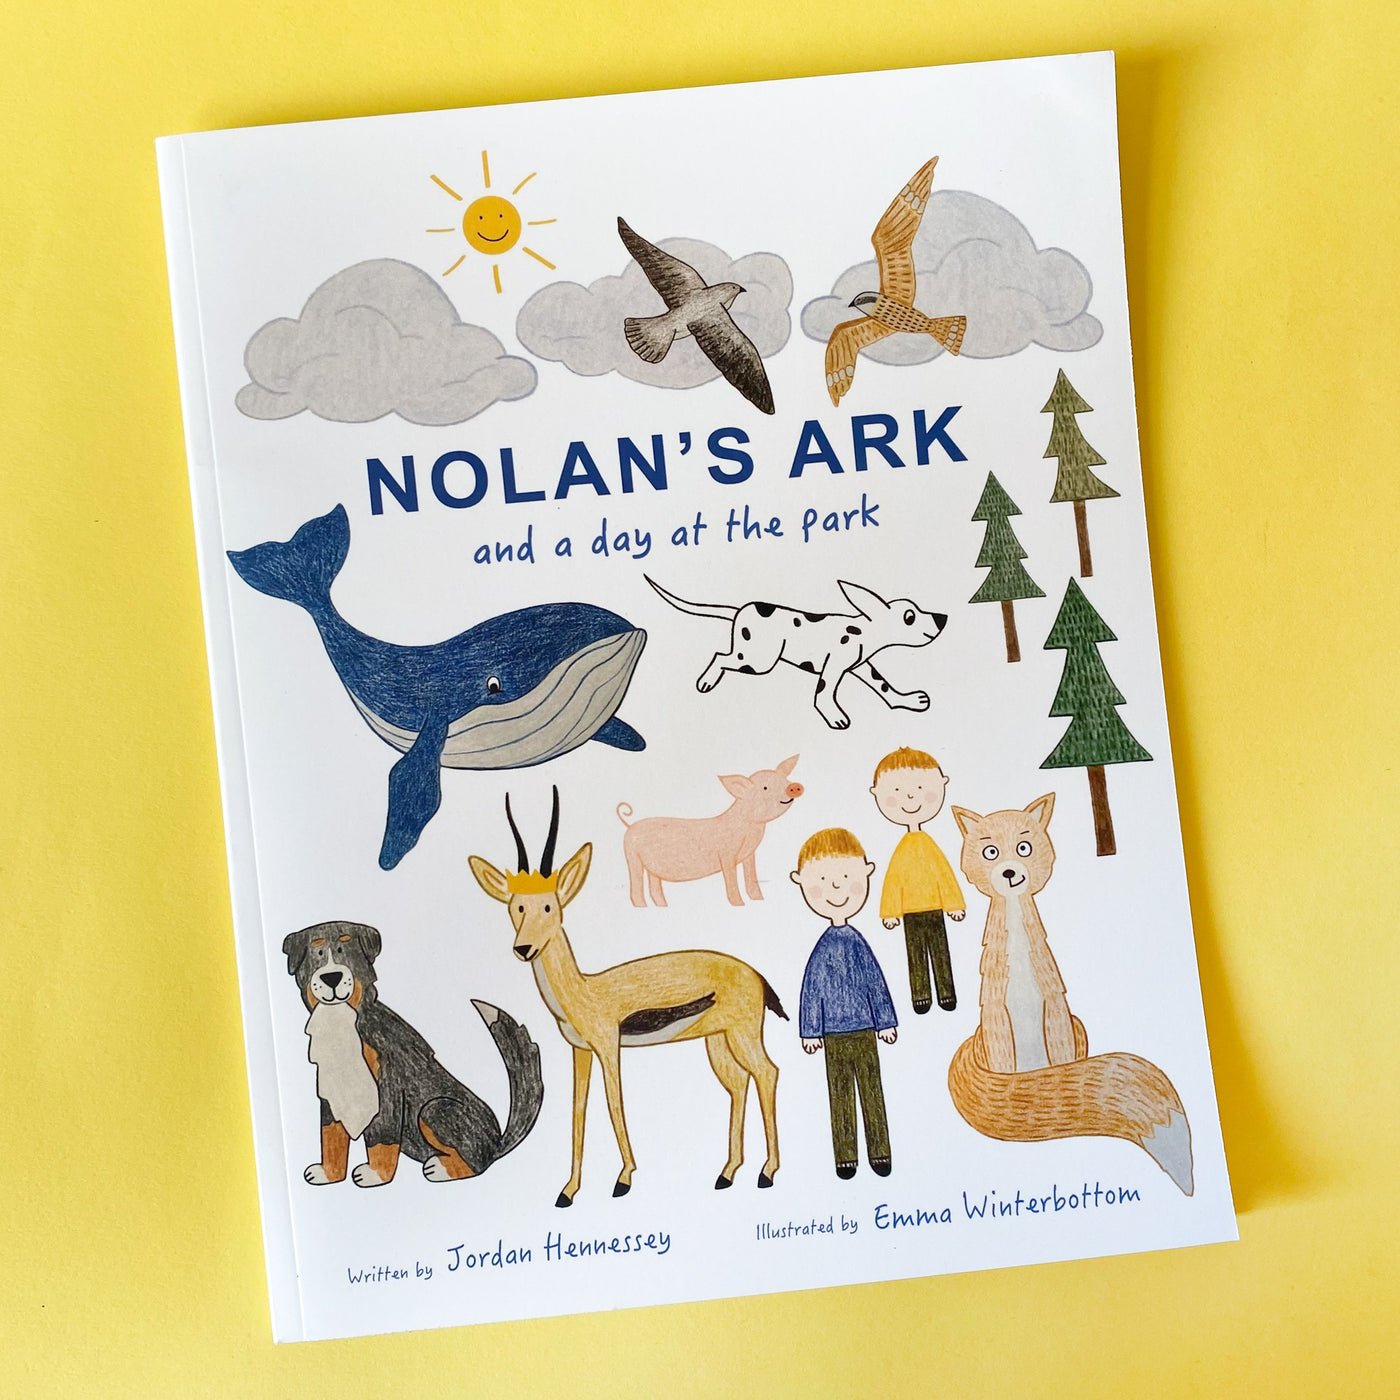 Nolan's Ark and A Day At The Park by Jordan Hennessey and Emma Winterbottom